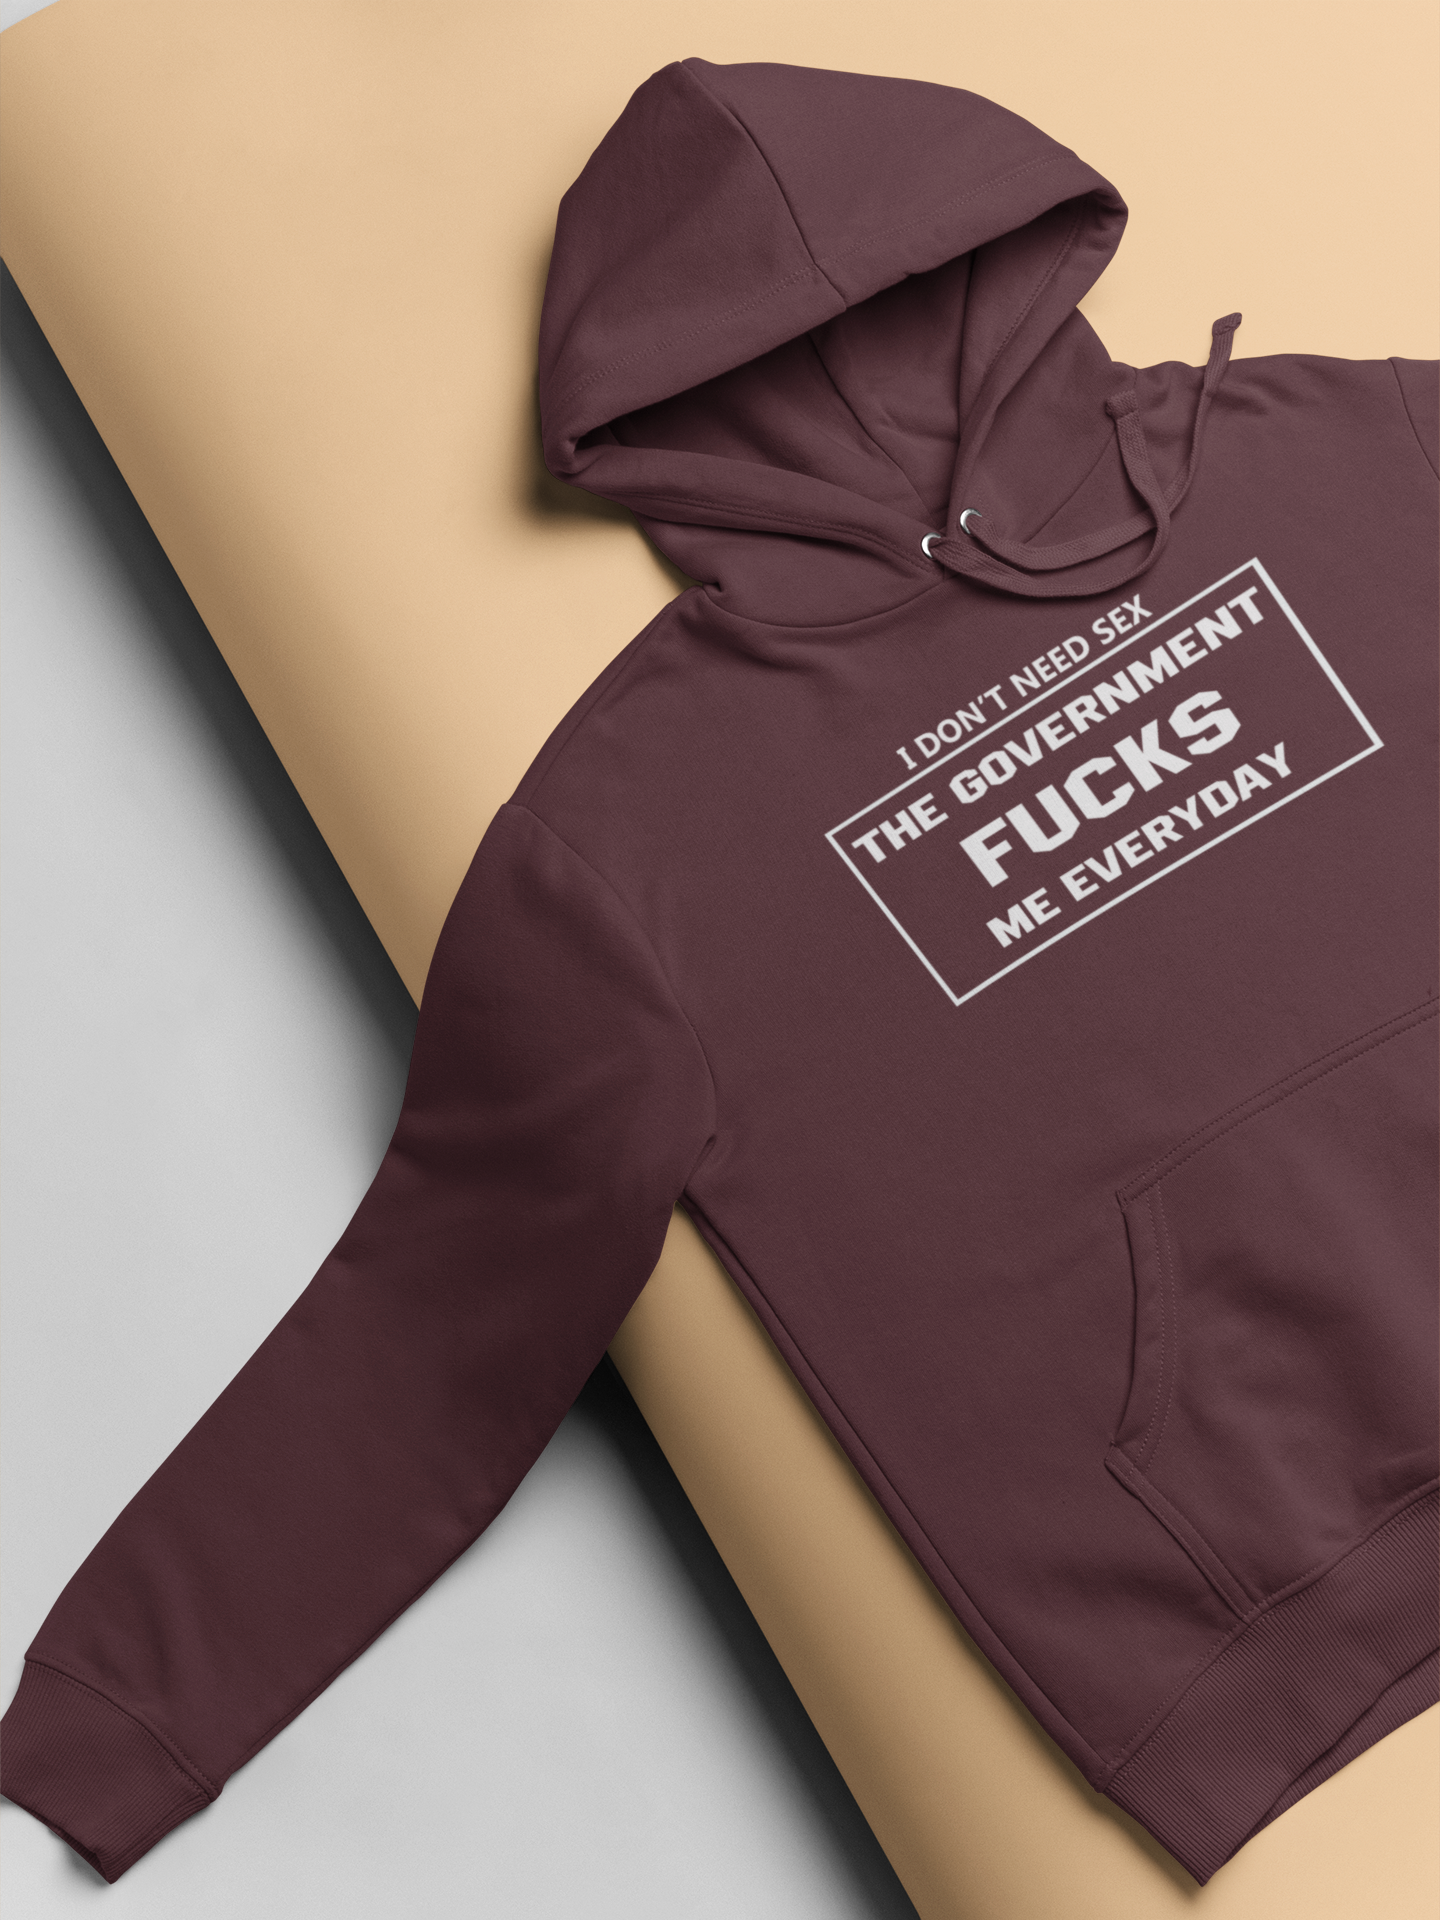 I Dont Need Sex The Government Fucks Me Everyday Anti Government Hoodies for Women-FunkyTeesClub